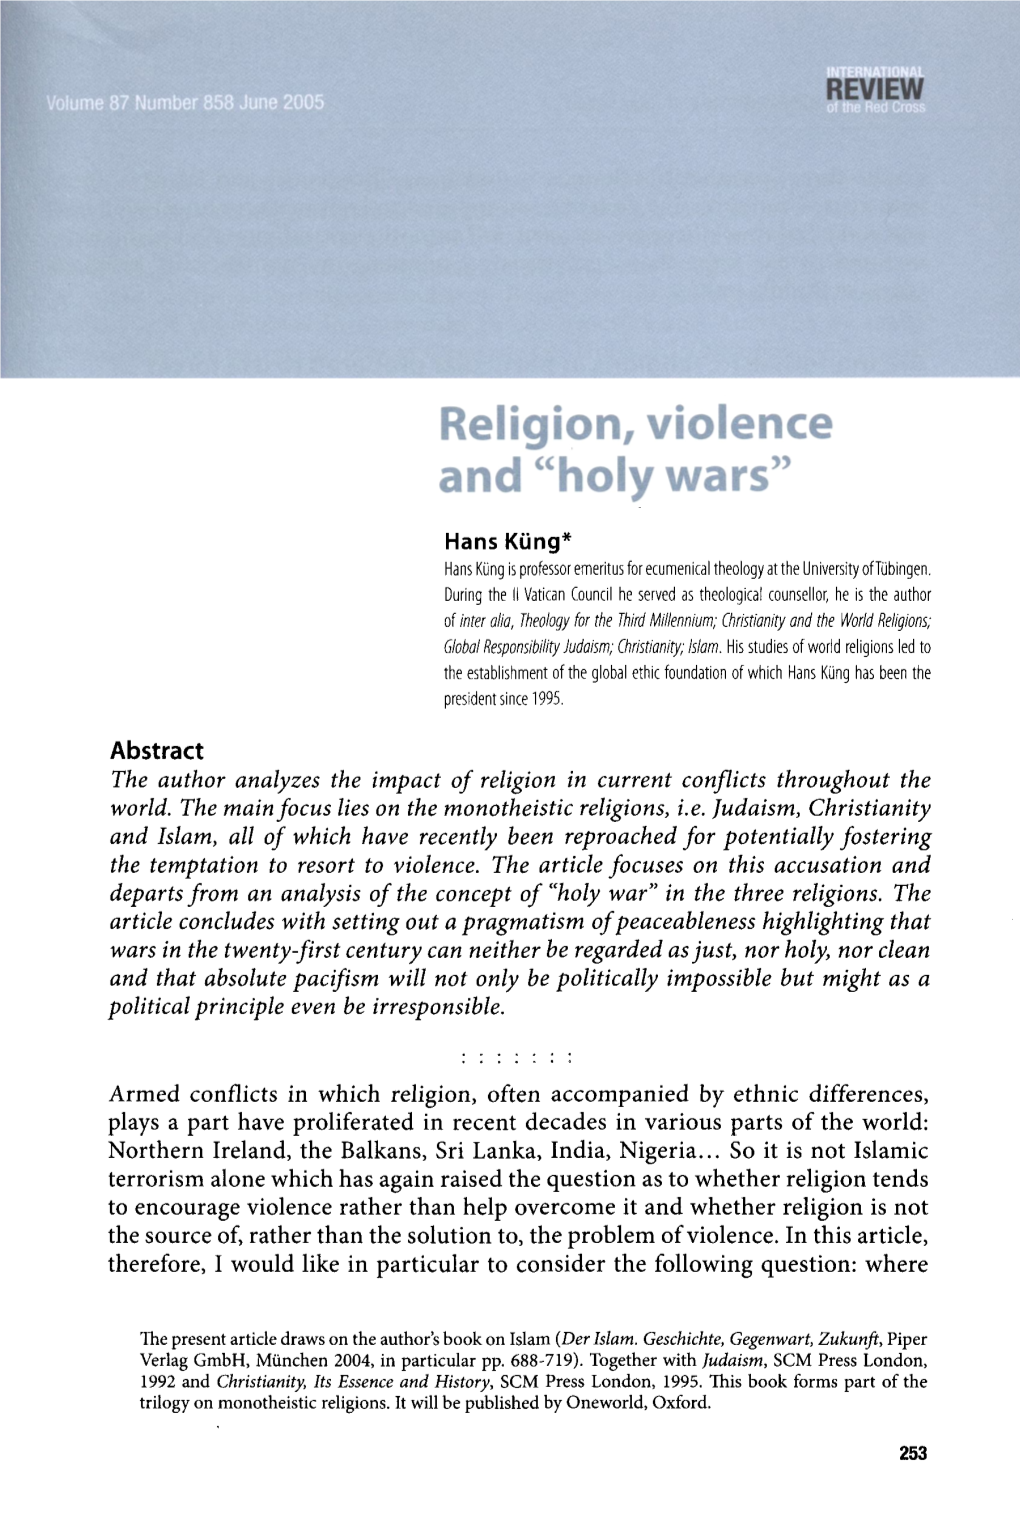 Religion, Violence and "Holy Wars"